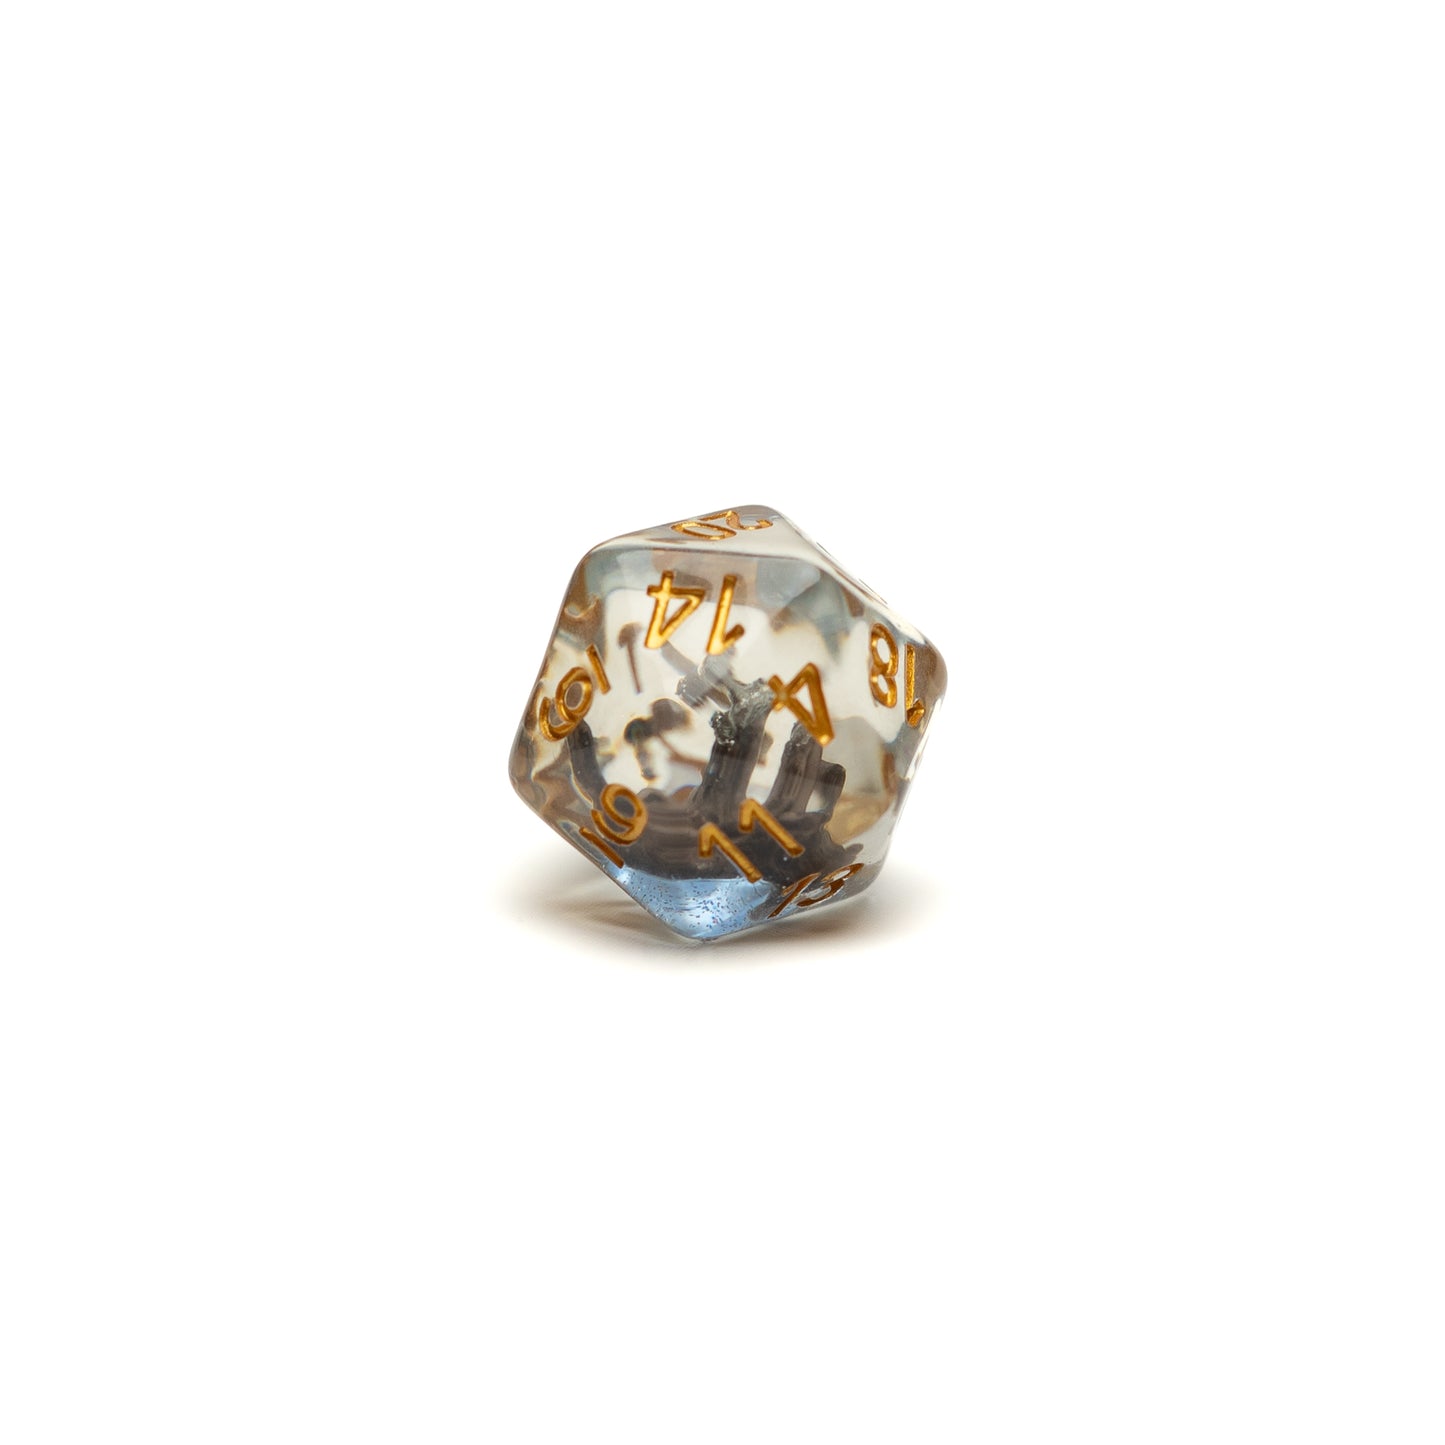 Roll Britannia Captain Timbers Dungeons and Dragons D20 acrylic dice with ship and ocean inside